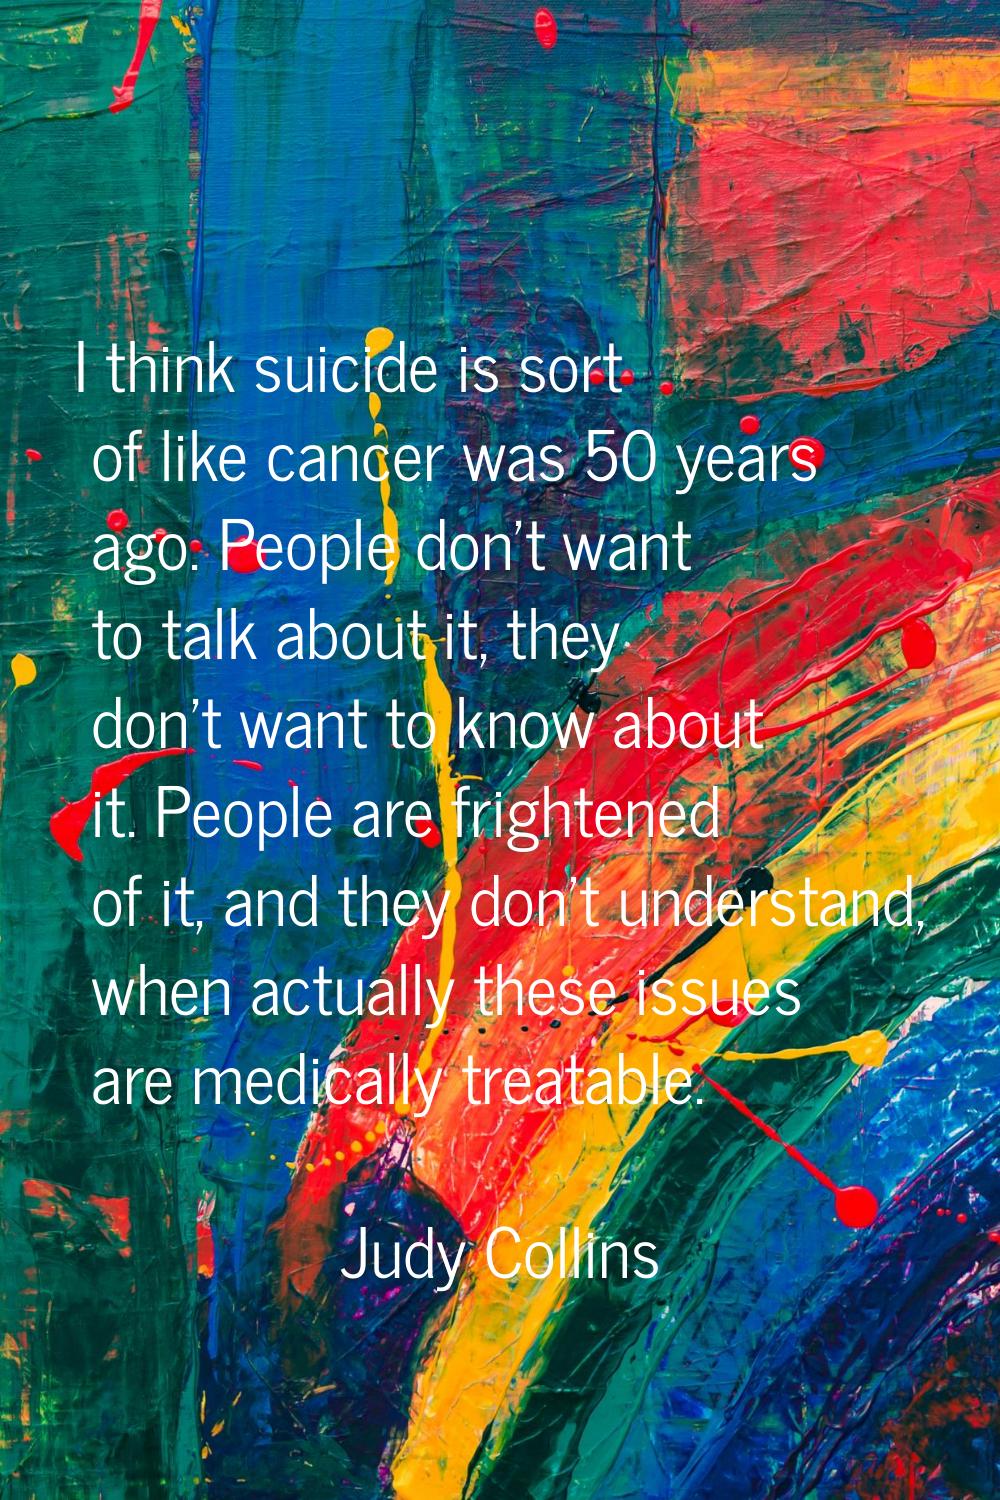 I think suicide is sort of like cancer was 50 years ago. People don't want to talk about it, they d